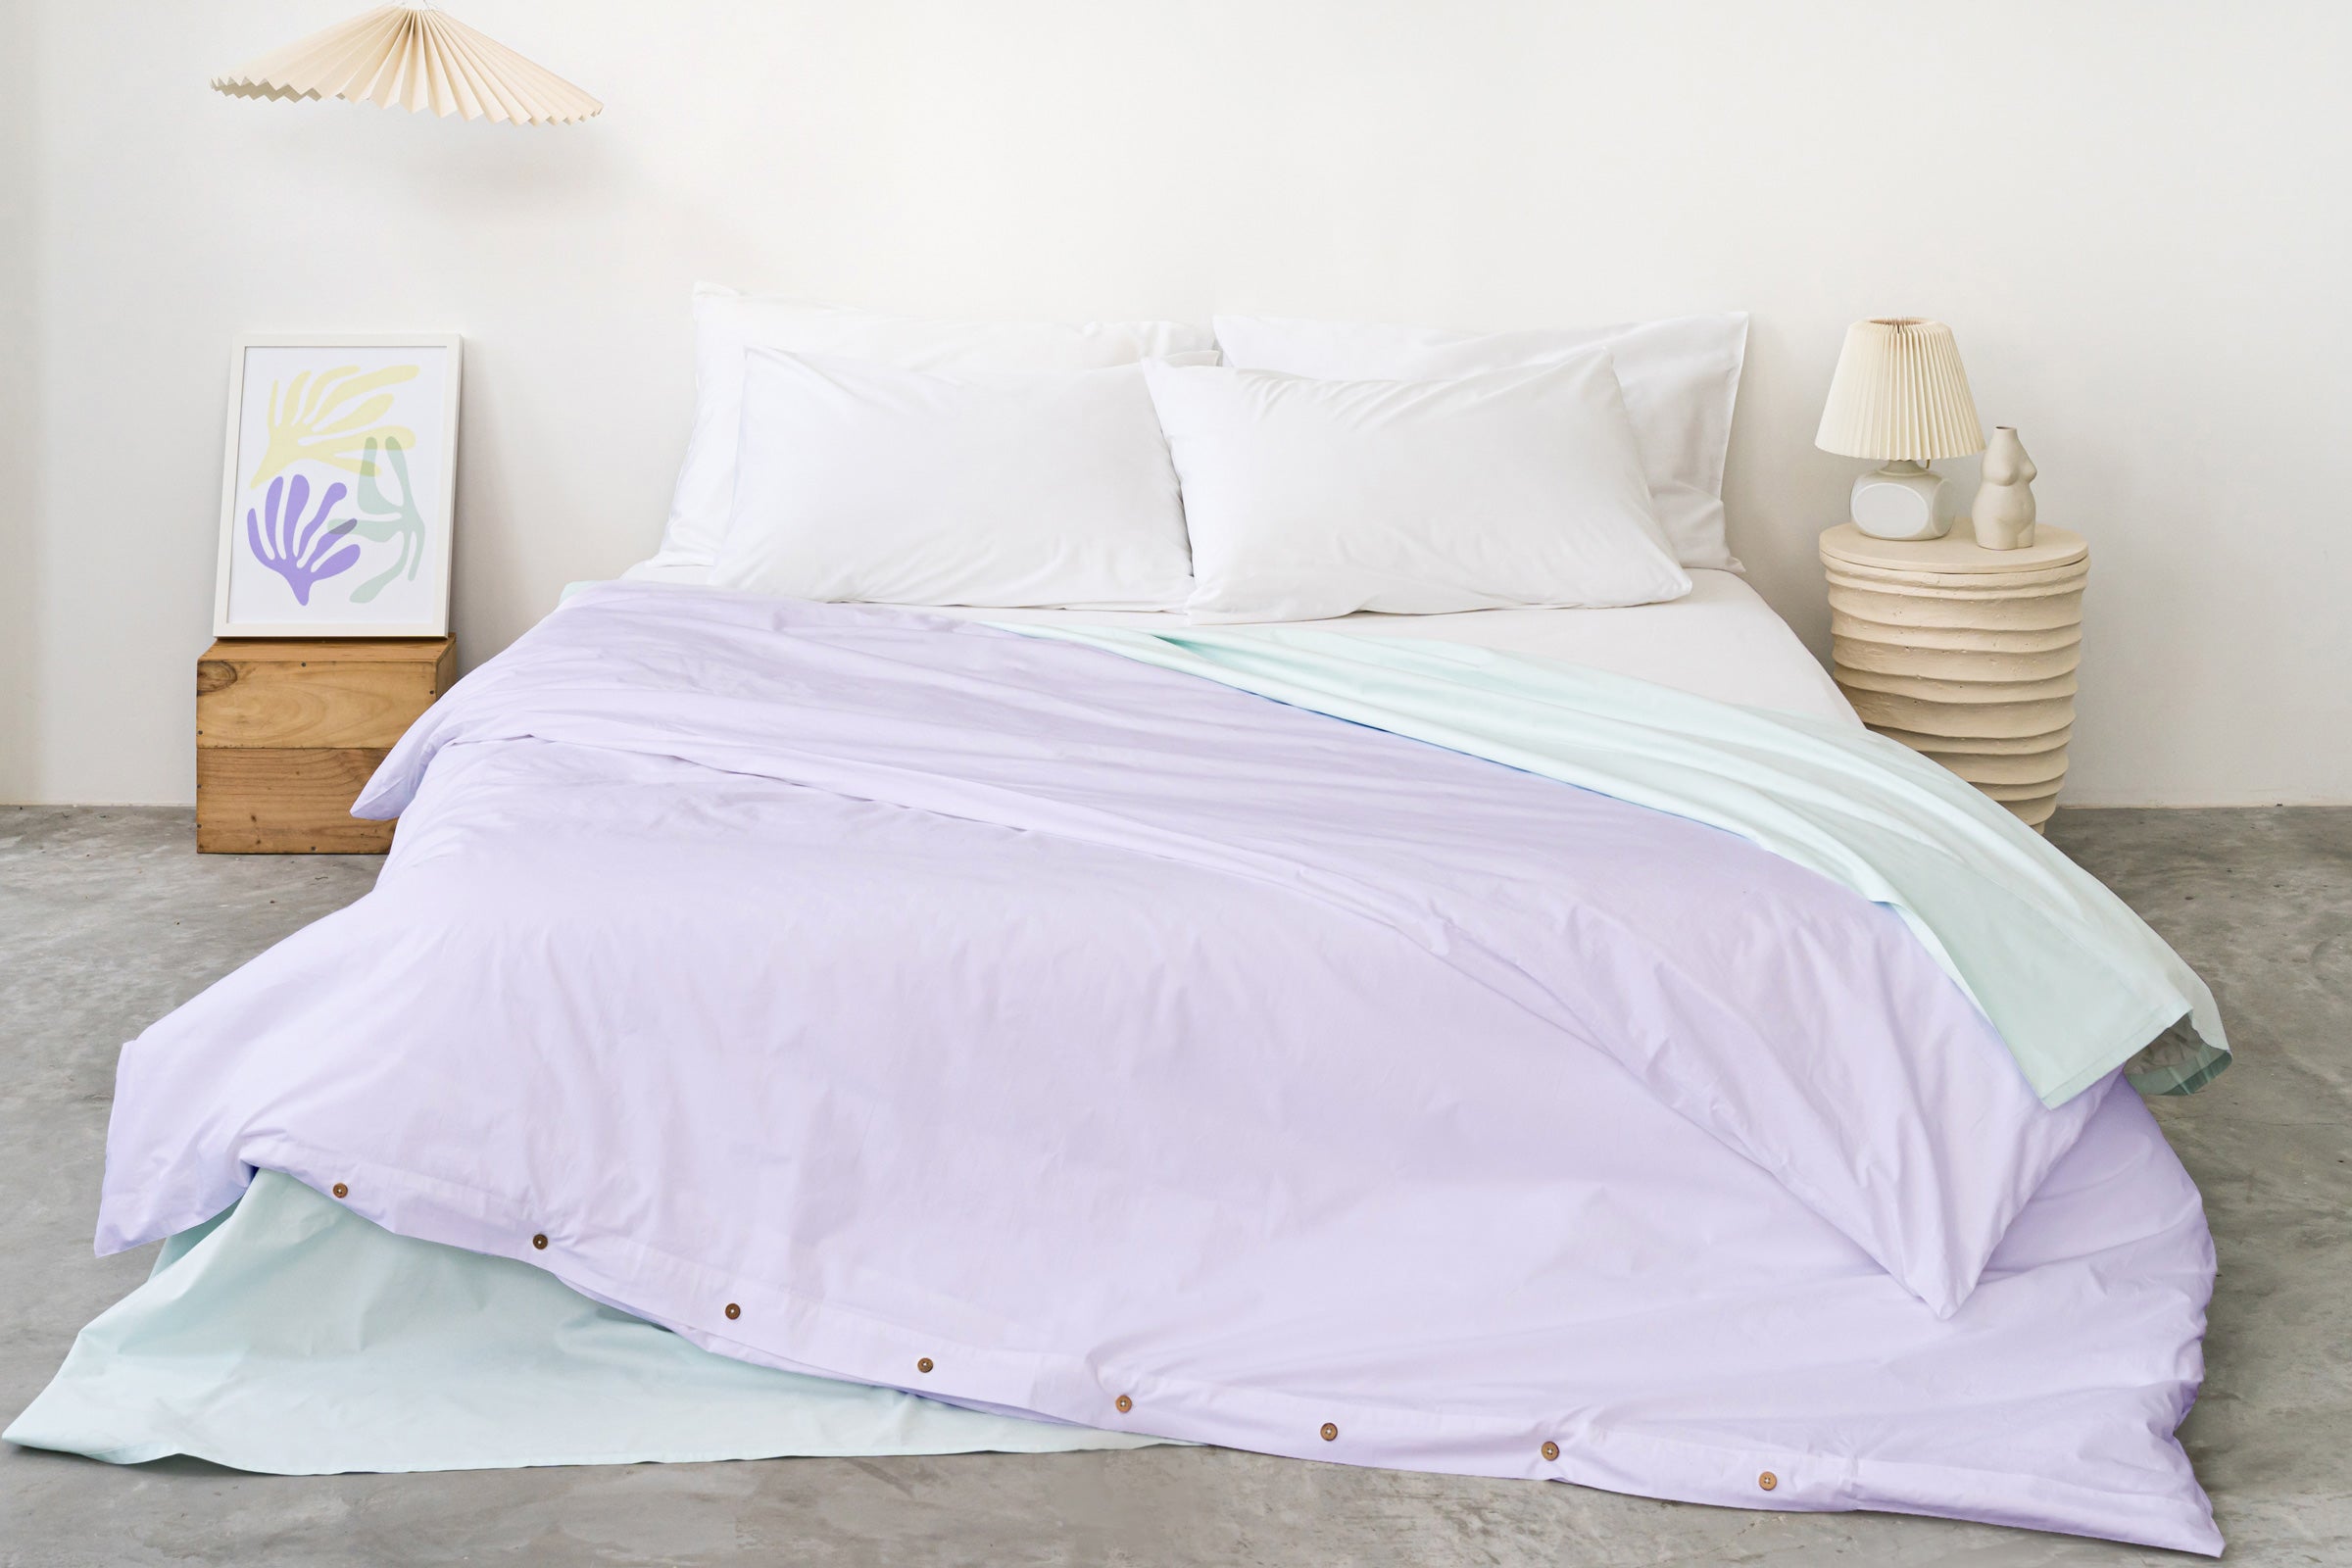 classic-lilac-duvet-cover-white-fitted-sheet-pillowcase-pair-mint-flat-sheet-by-sojao.jpg